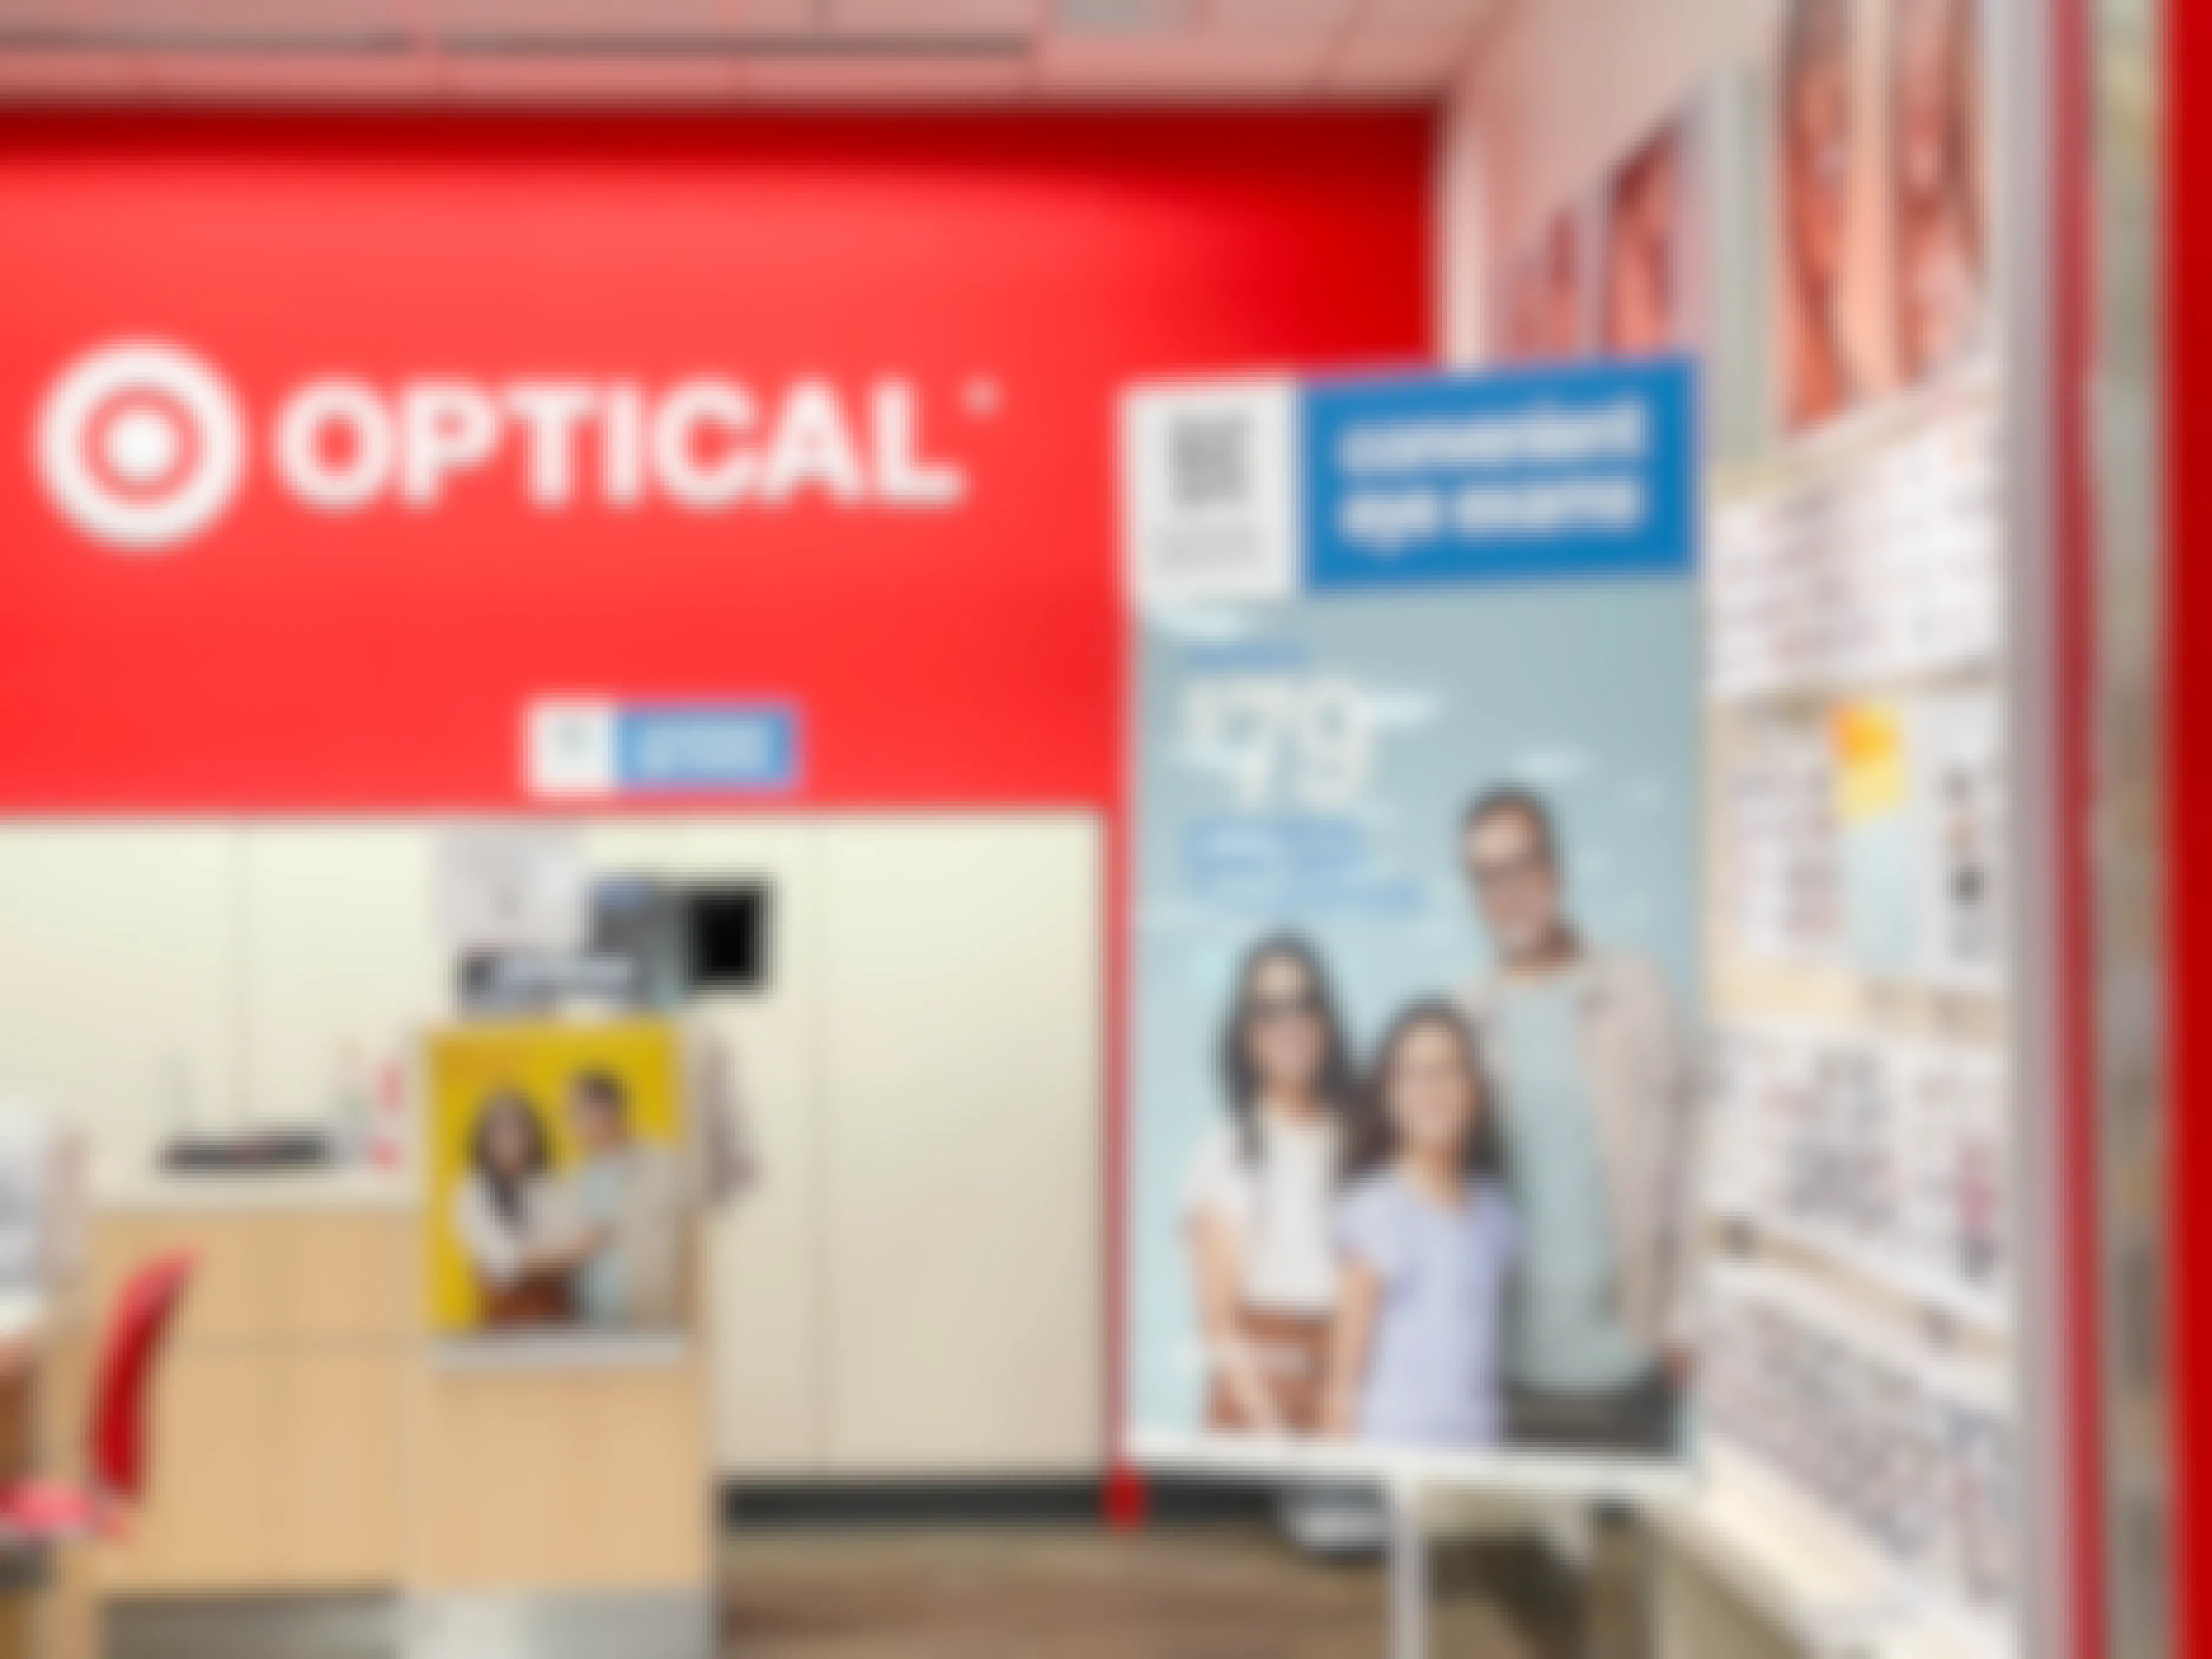 The Target optical section in-store with a sign advertising for convenient eye exams.